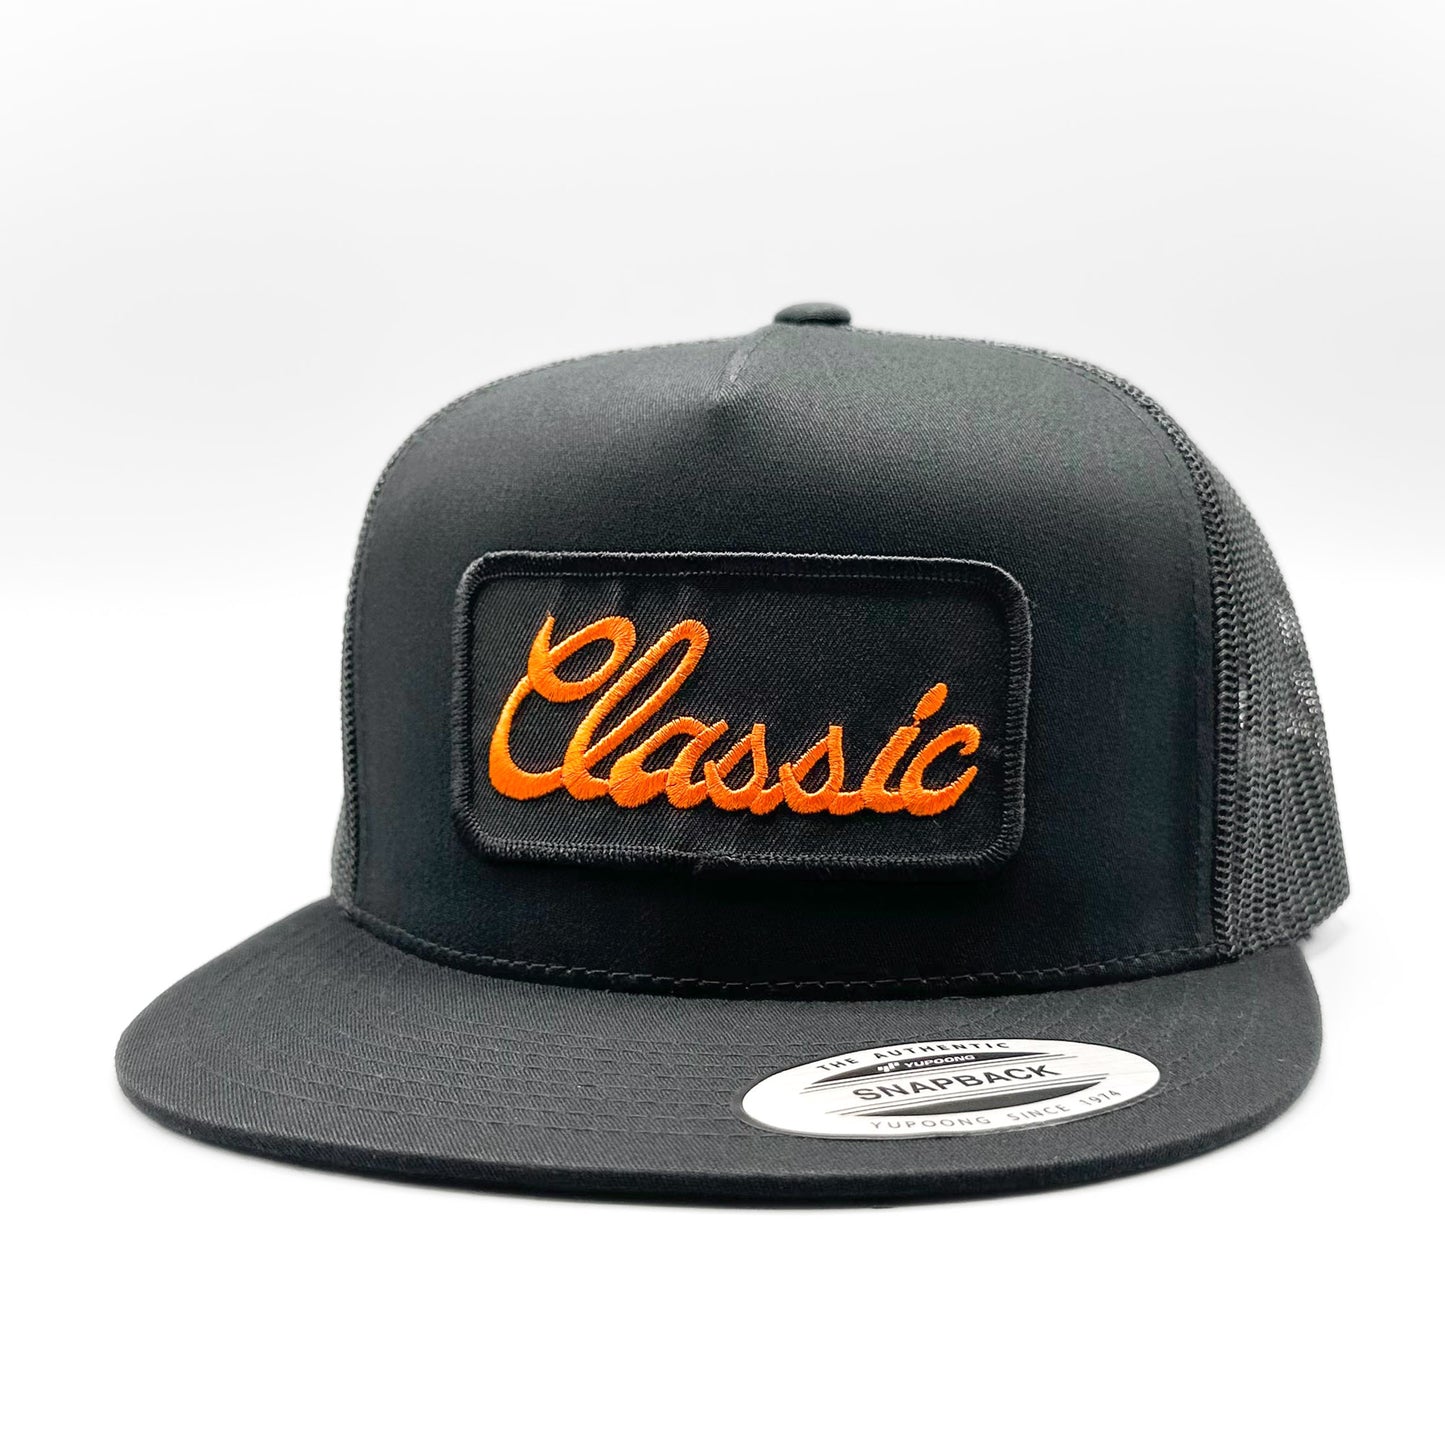 Classic Embroidered Script Trucker Hat – Vintage Truckers